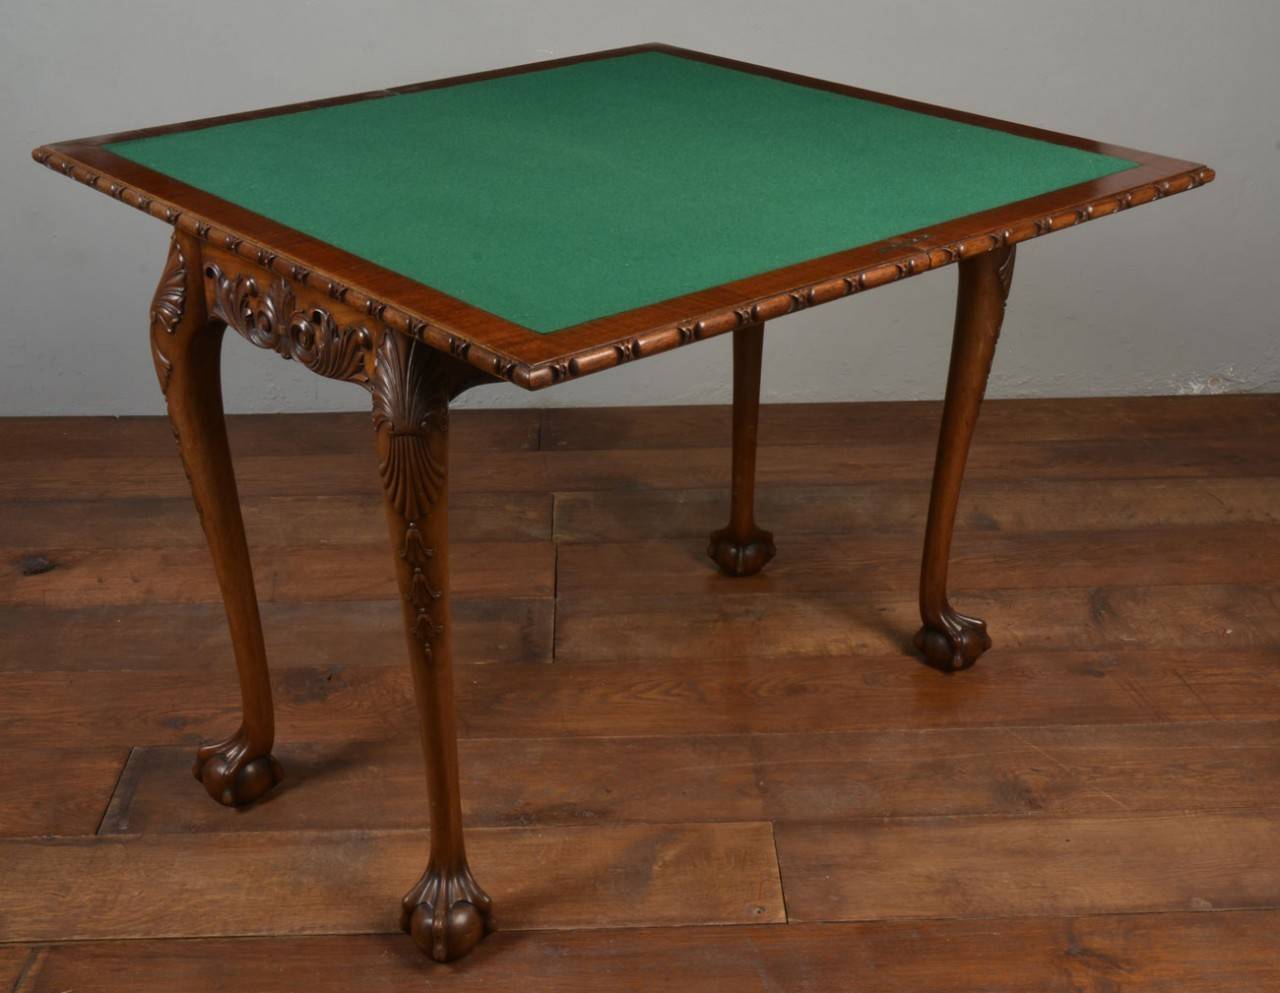 Chippendale style crossbanded mahogany fold over card table/ side table the large rectangular flame mahogany top opening to reveal inset green baize interior above a foliate carved apron and shell carved slender supports terminating in ball and claw